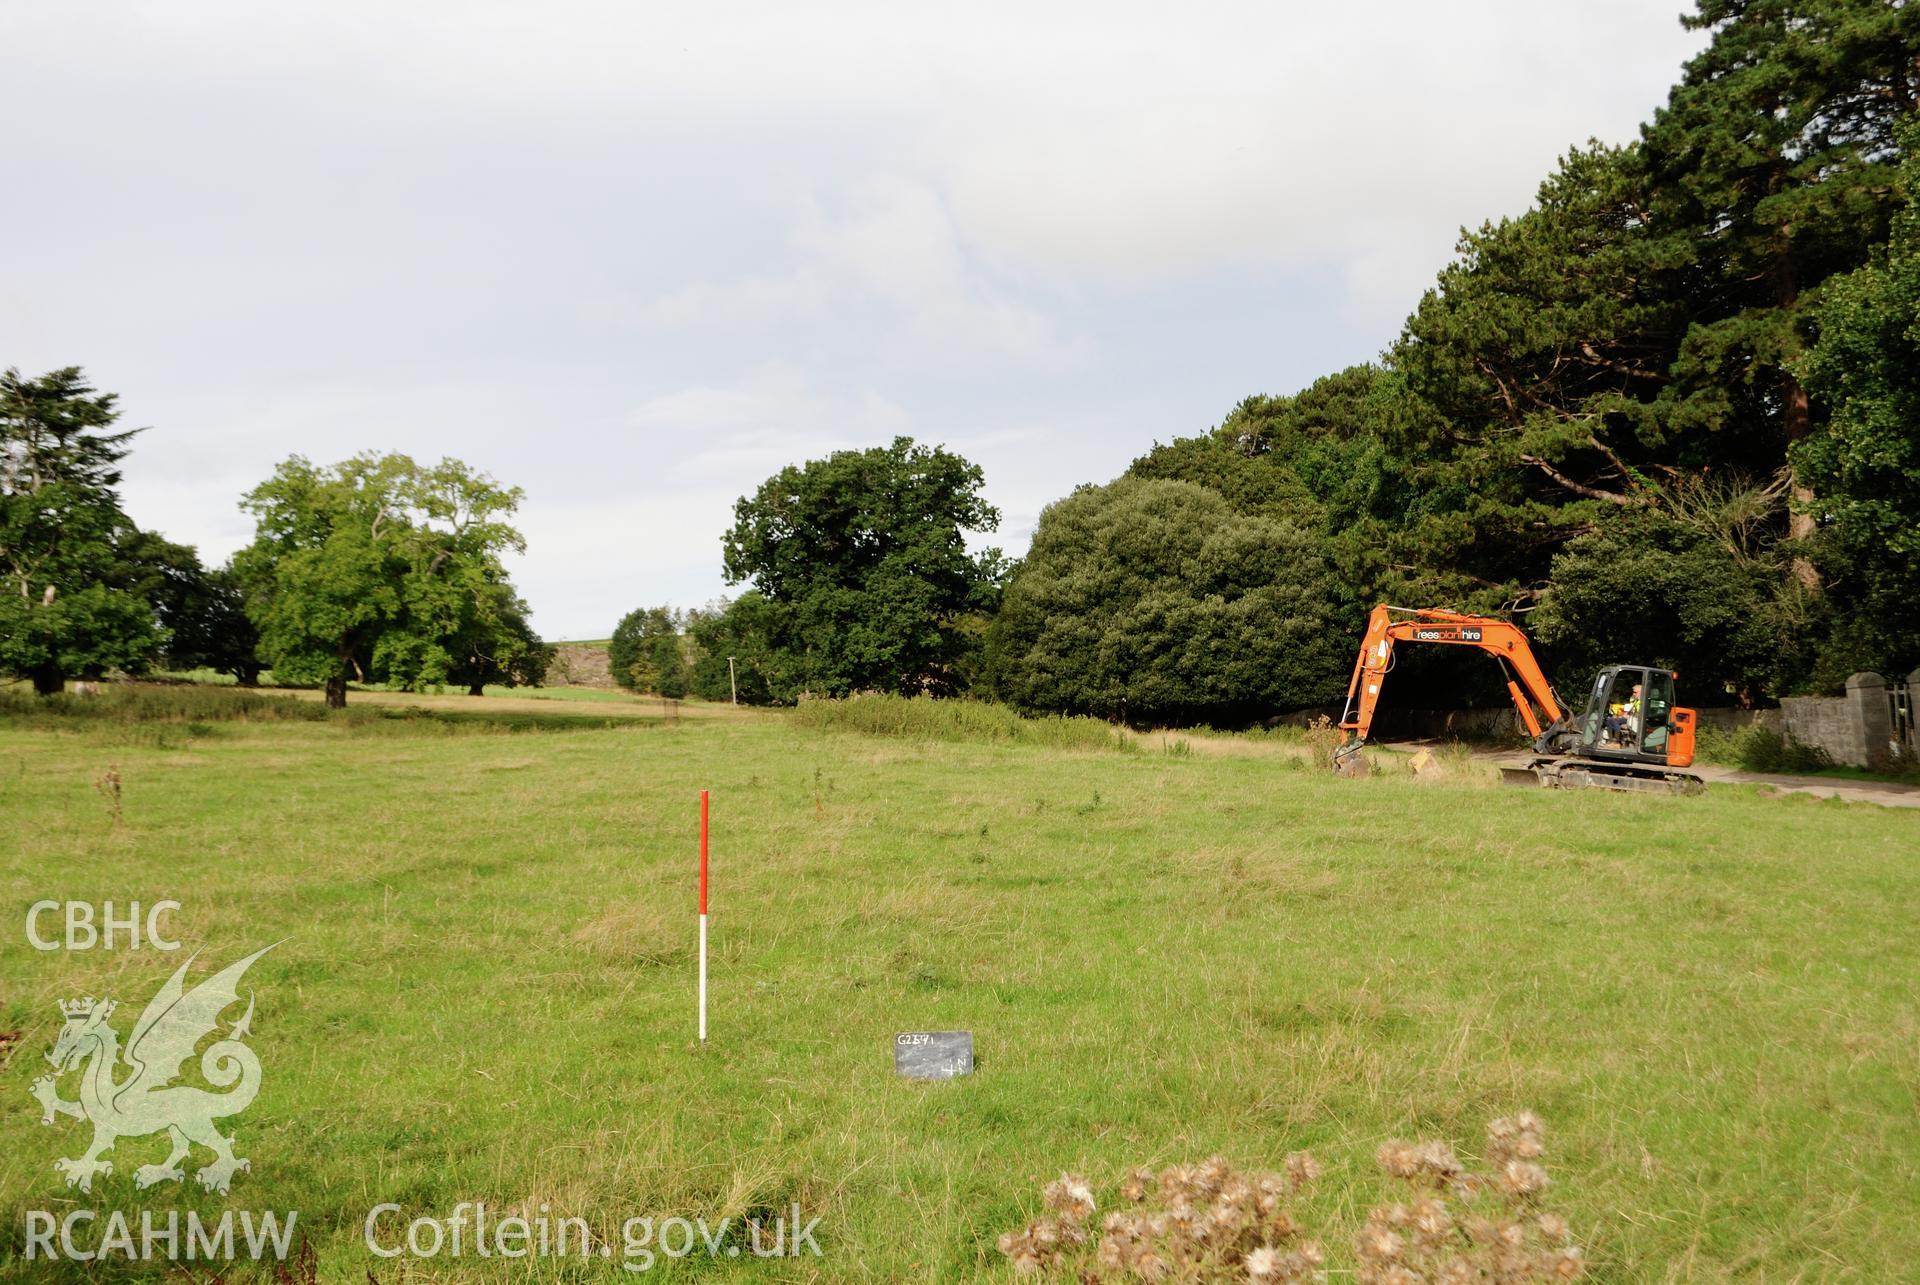 Wide angle view from east of evaluation area pre-excavation, with garden boundary wall to the north. Photographed during archaeological evaluation of Kinmel Park, Abergele, conducted by Gwynedd Archaeological Trust on 22nd August 2018. Project no. 2571.